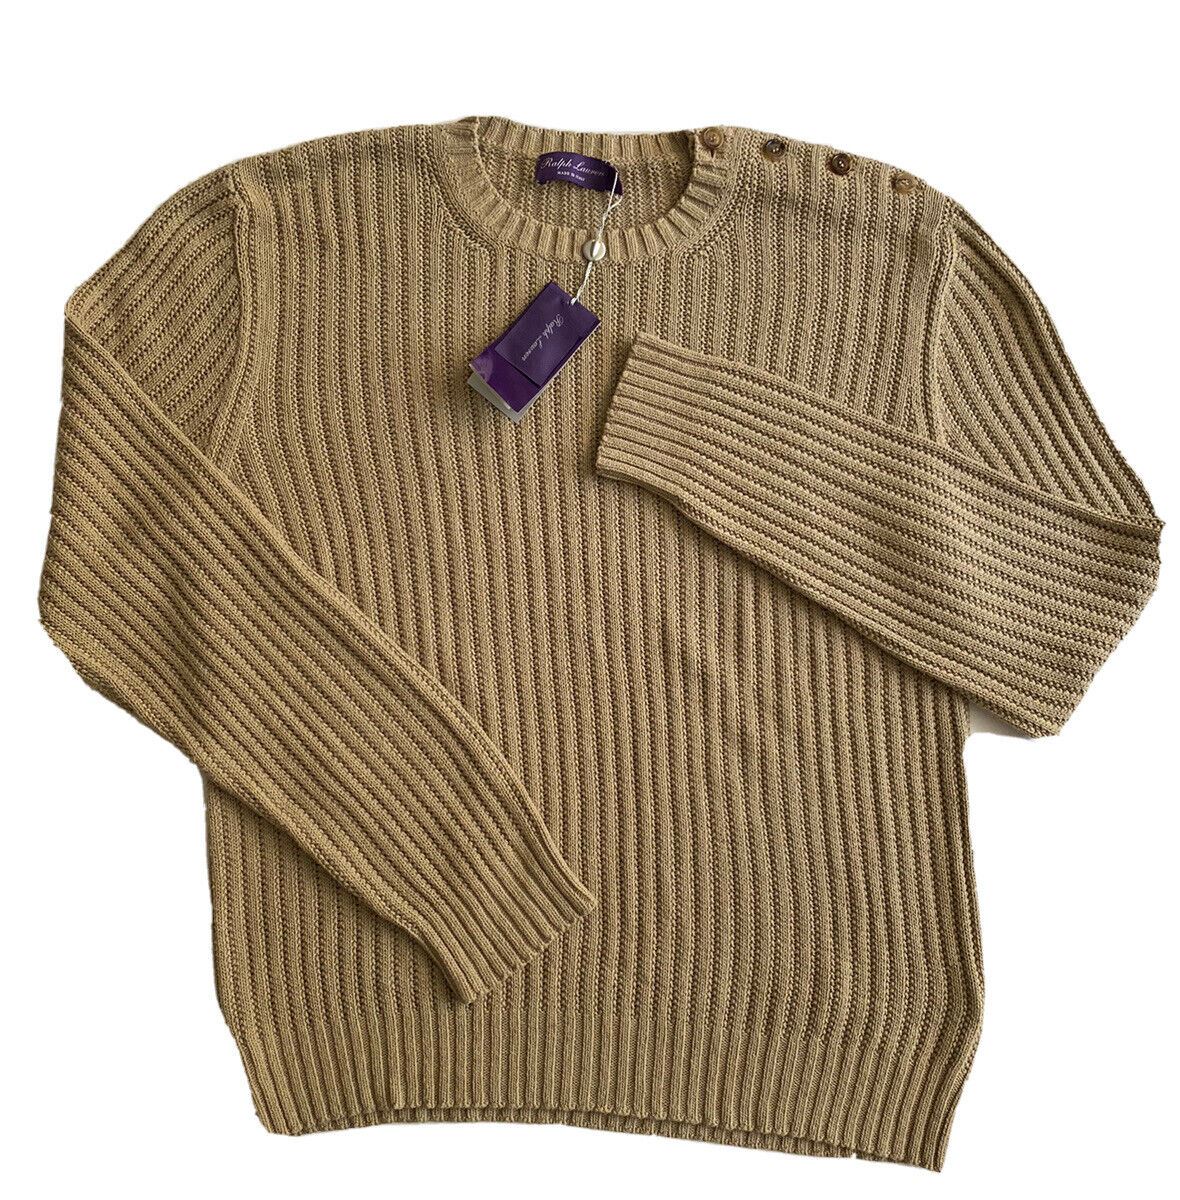 NWT $995 Polo Ralph Lauren Purple Label Men's Silk Sweater XL Made in Italy